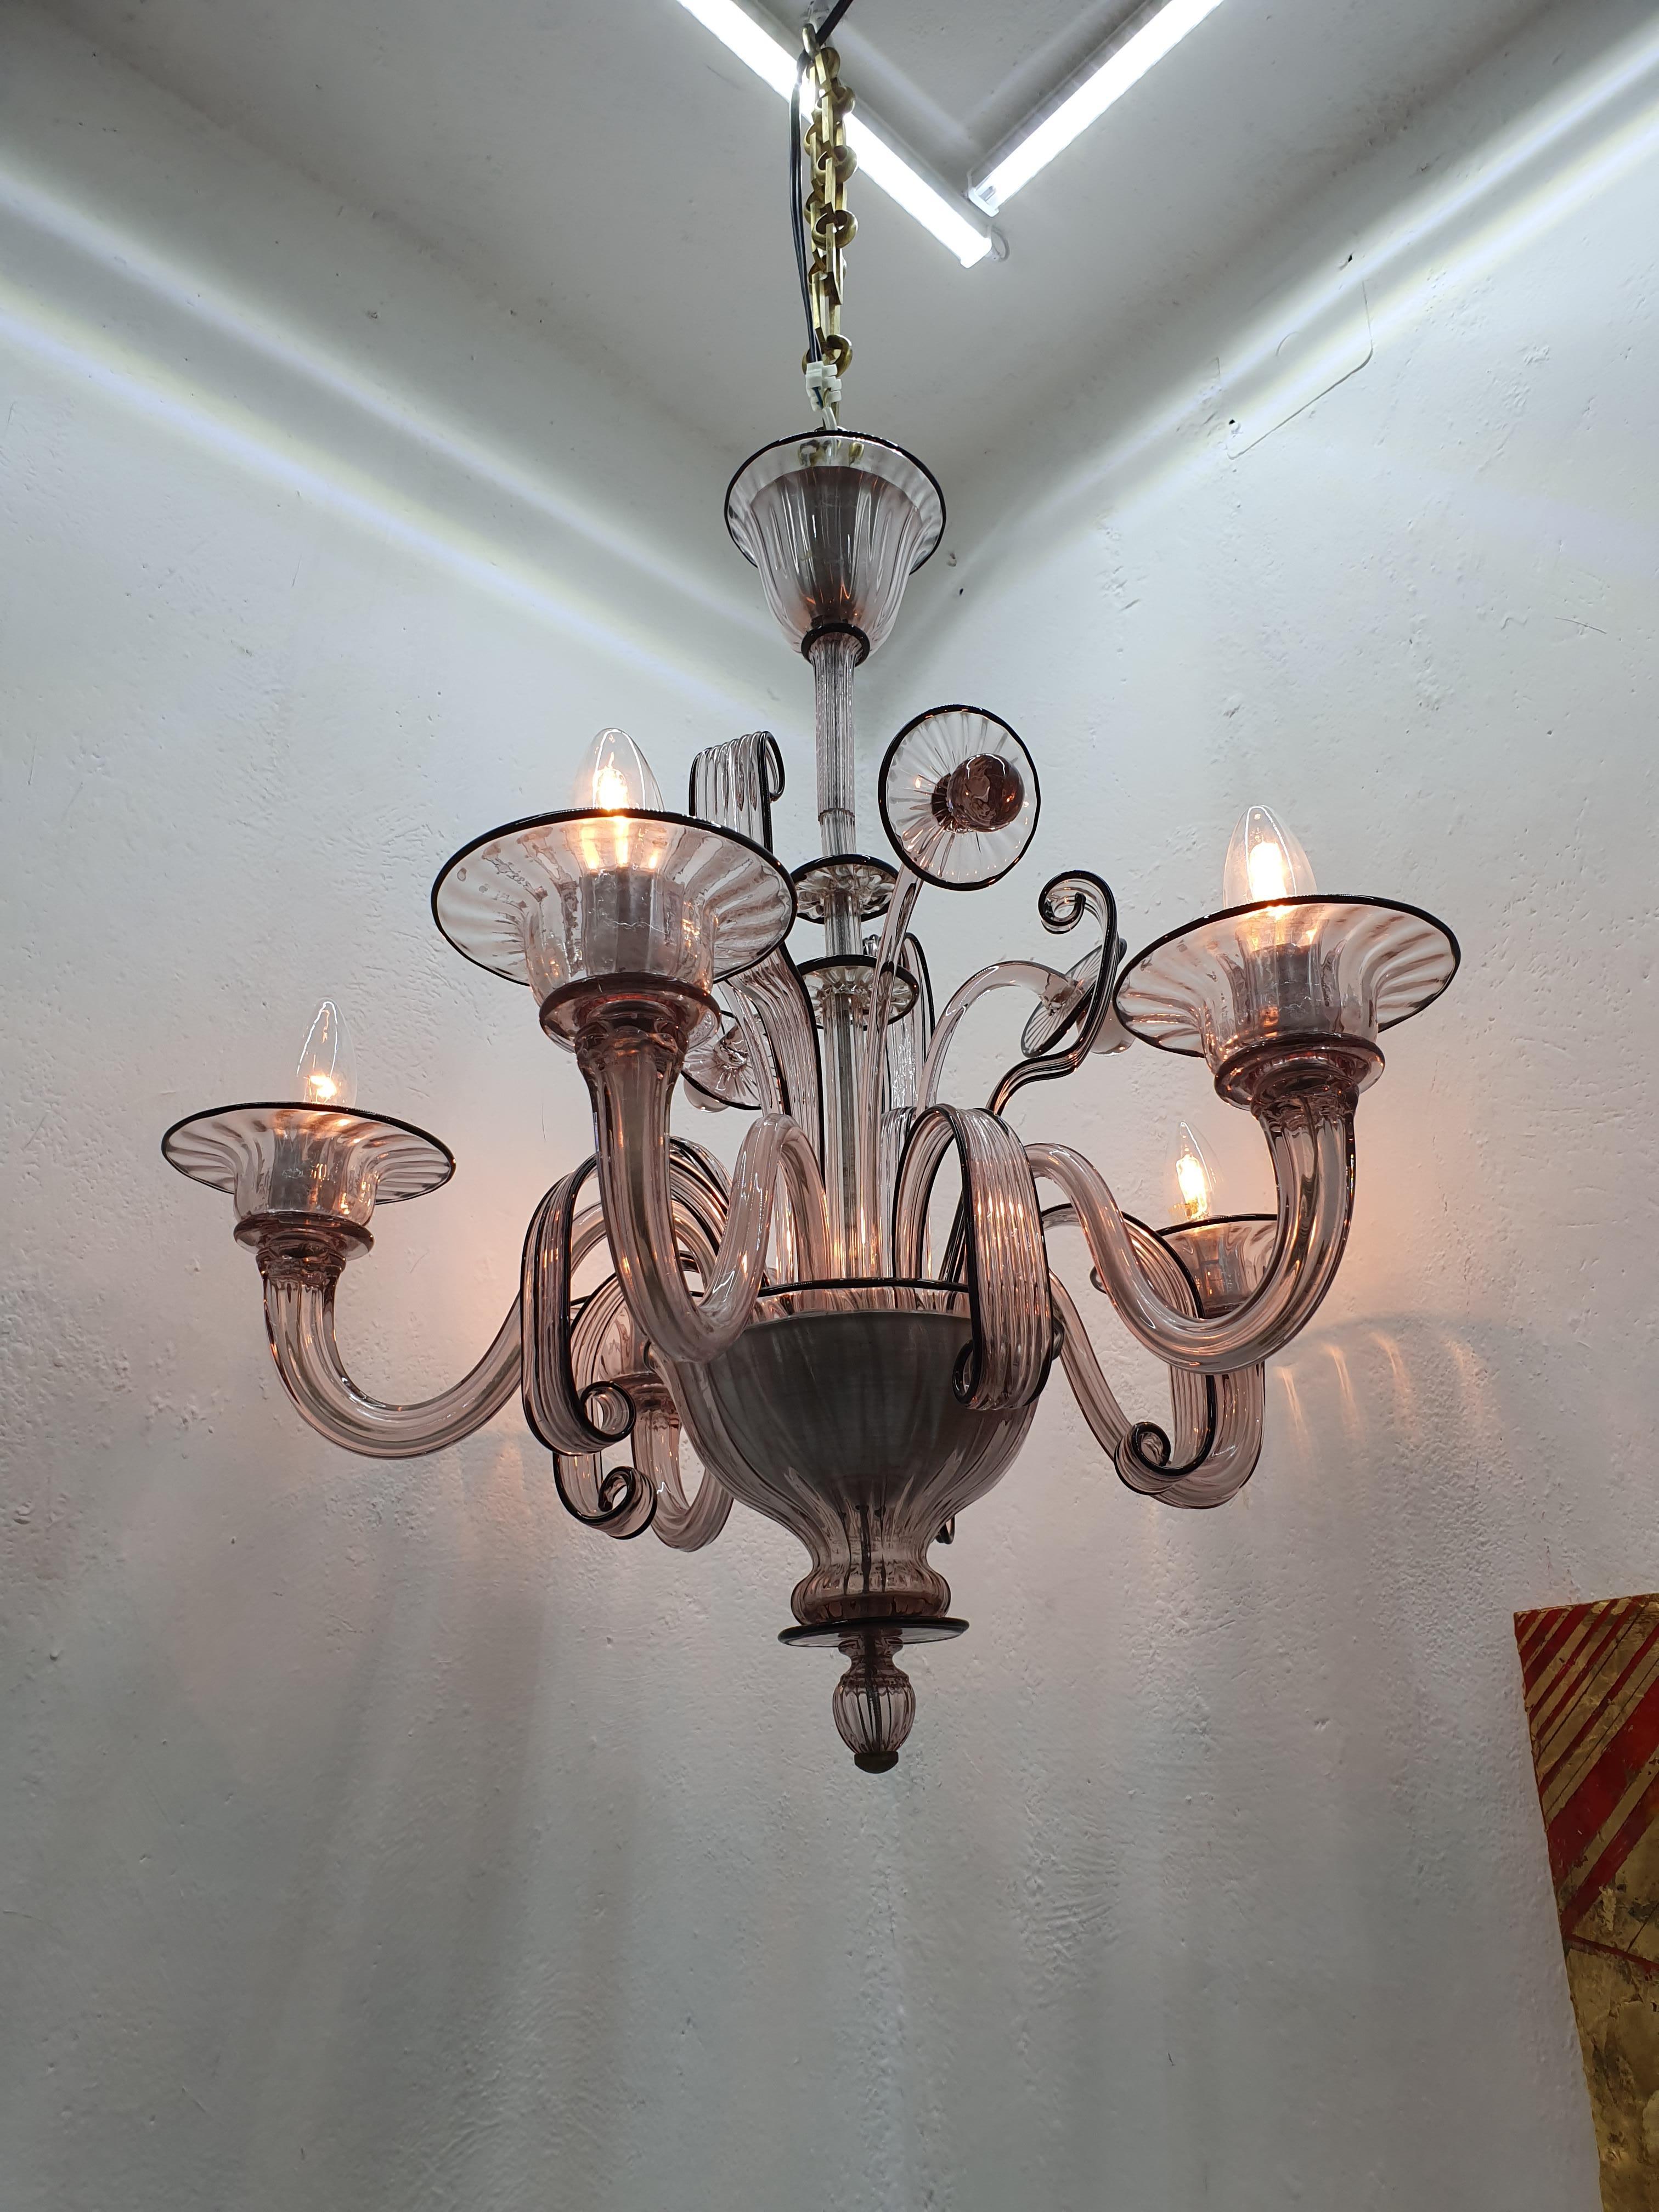 Art Deco Style Chandelier Attributed to Venini Murano Glass, Itlay, circa 1940 For Sale 10